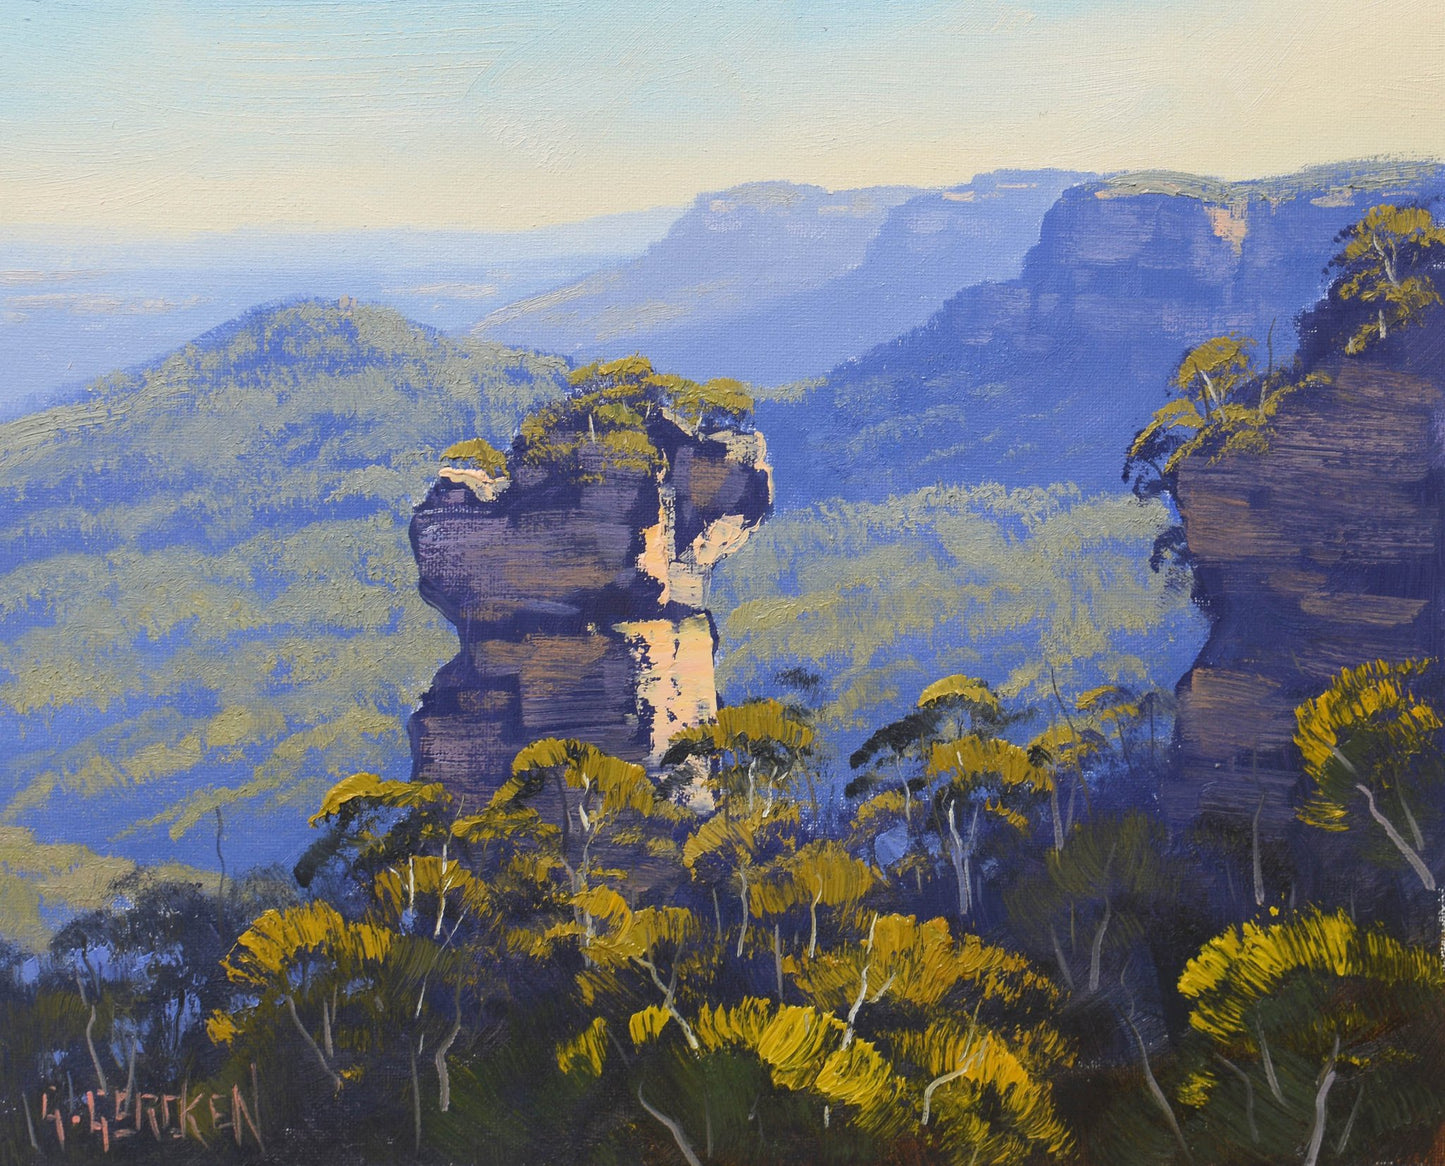 Framed Original Oil Painting : The Blue Mountains Landscape of Orphan Rock Katoomba - A Breathtaking Natural Beauty